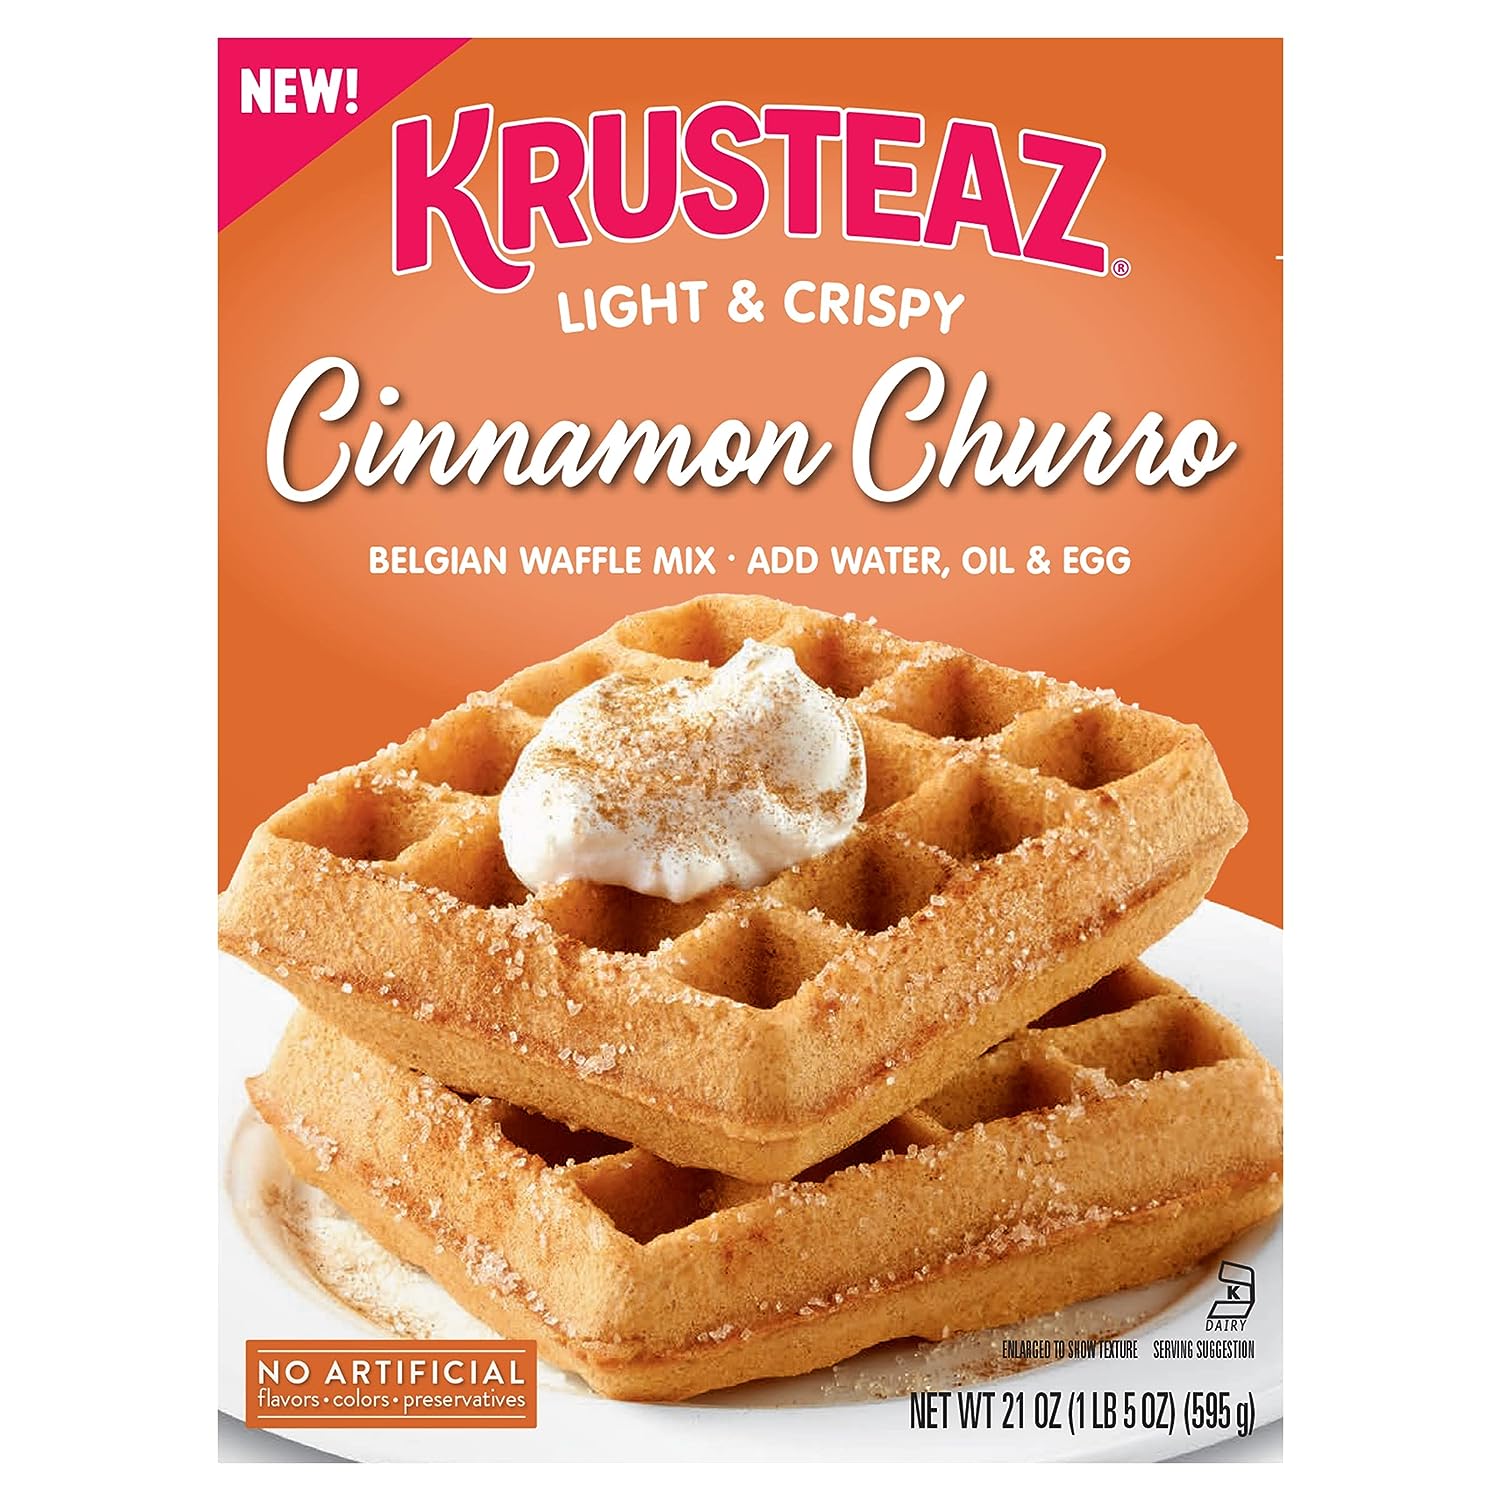 Krusteaz Light & Fluffy Cinnamon Churro Belgian Waffle Mix, Free of Artificial Flavors, Colors, or Perservatives, 21-ounce Boxes (Pack of 8)